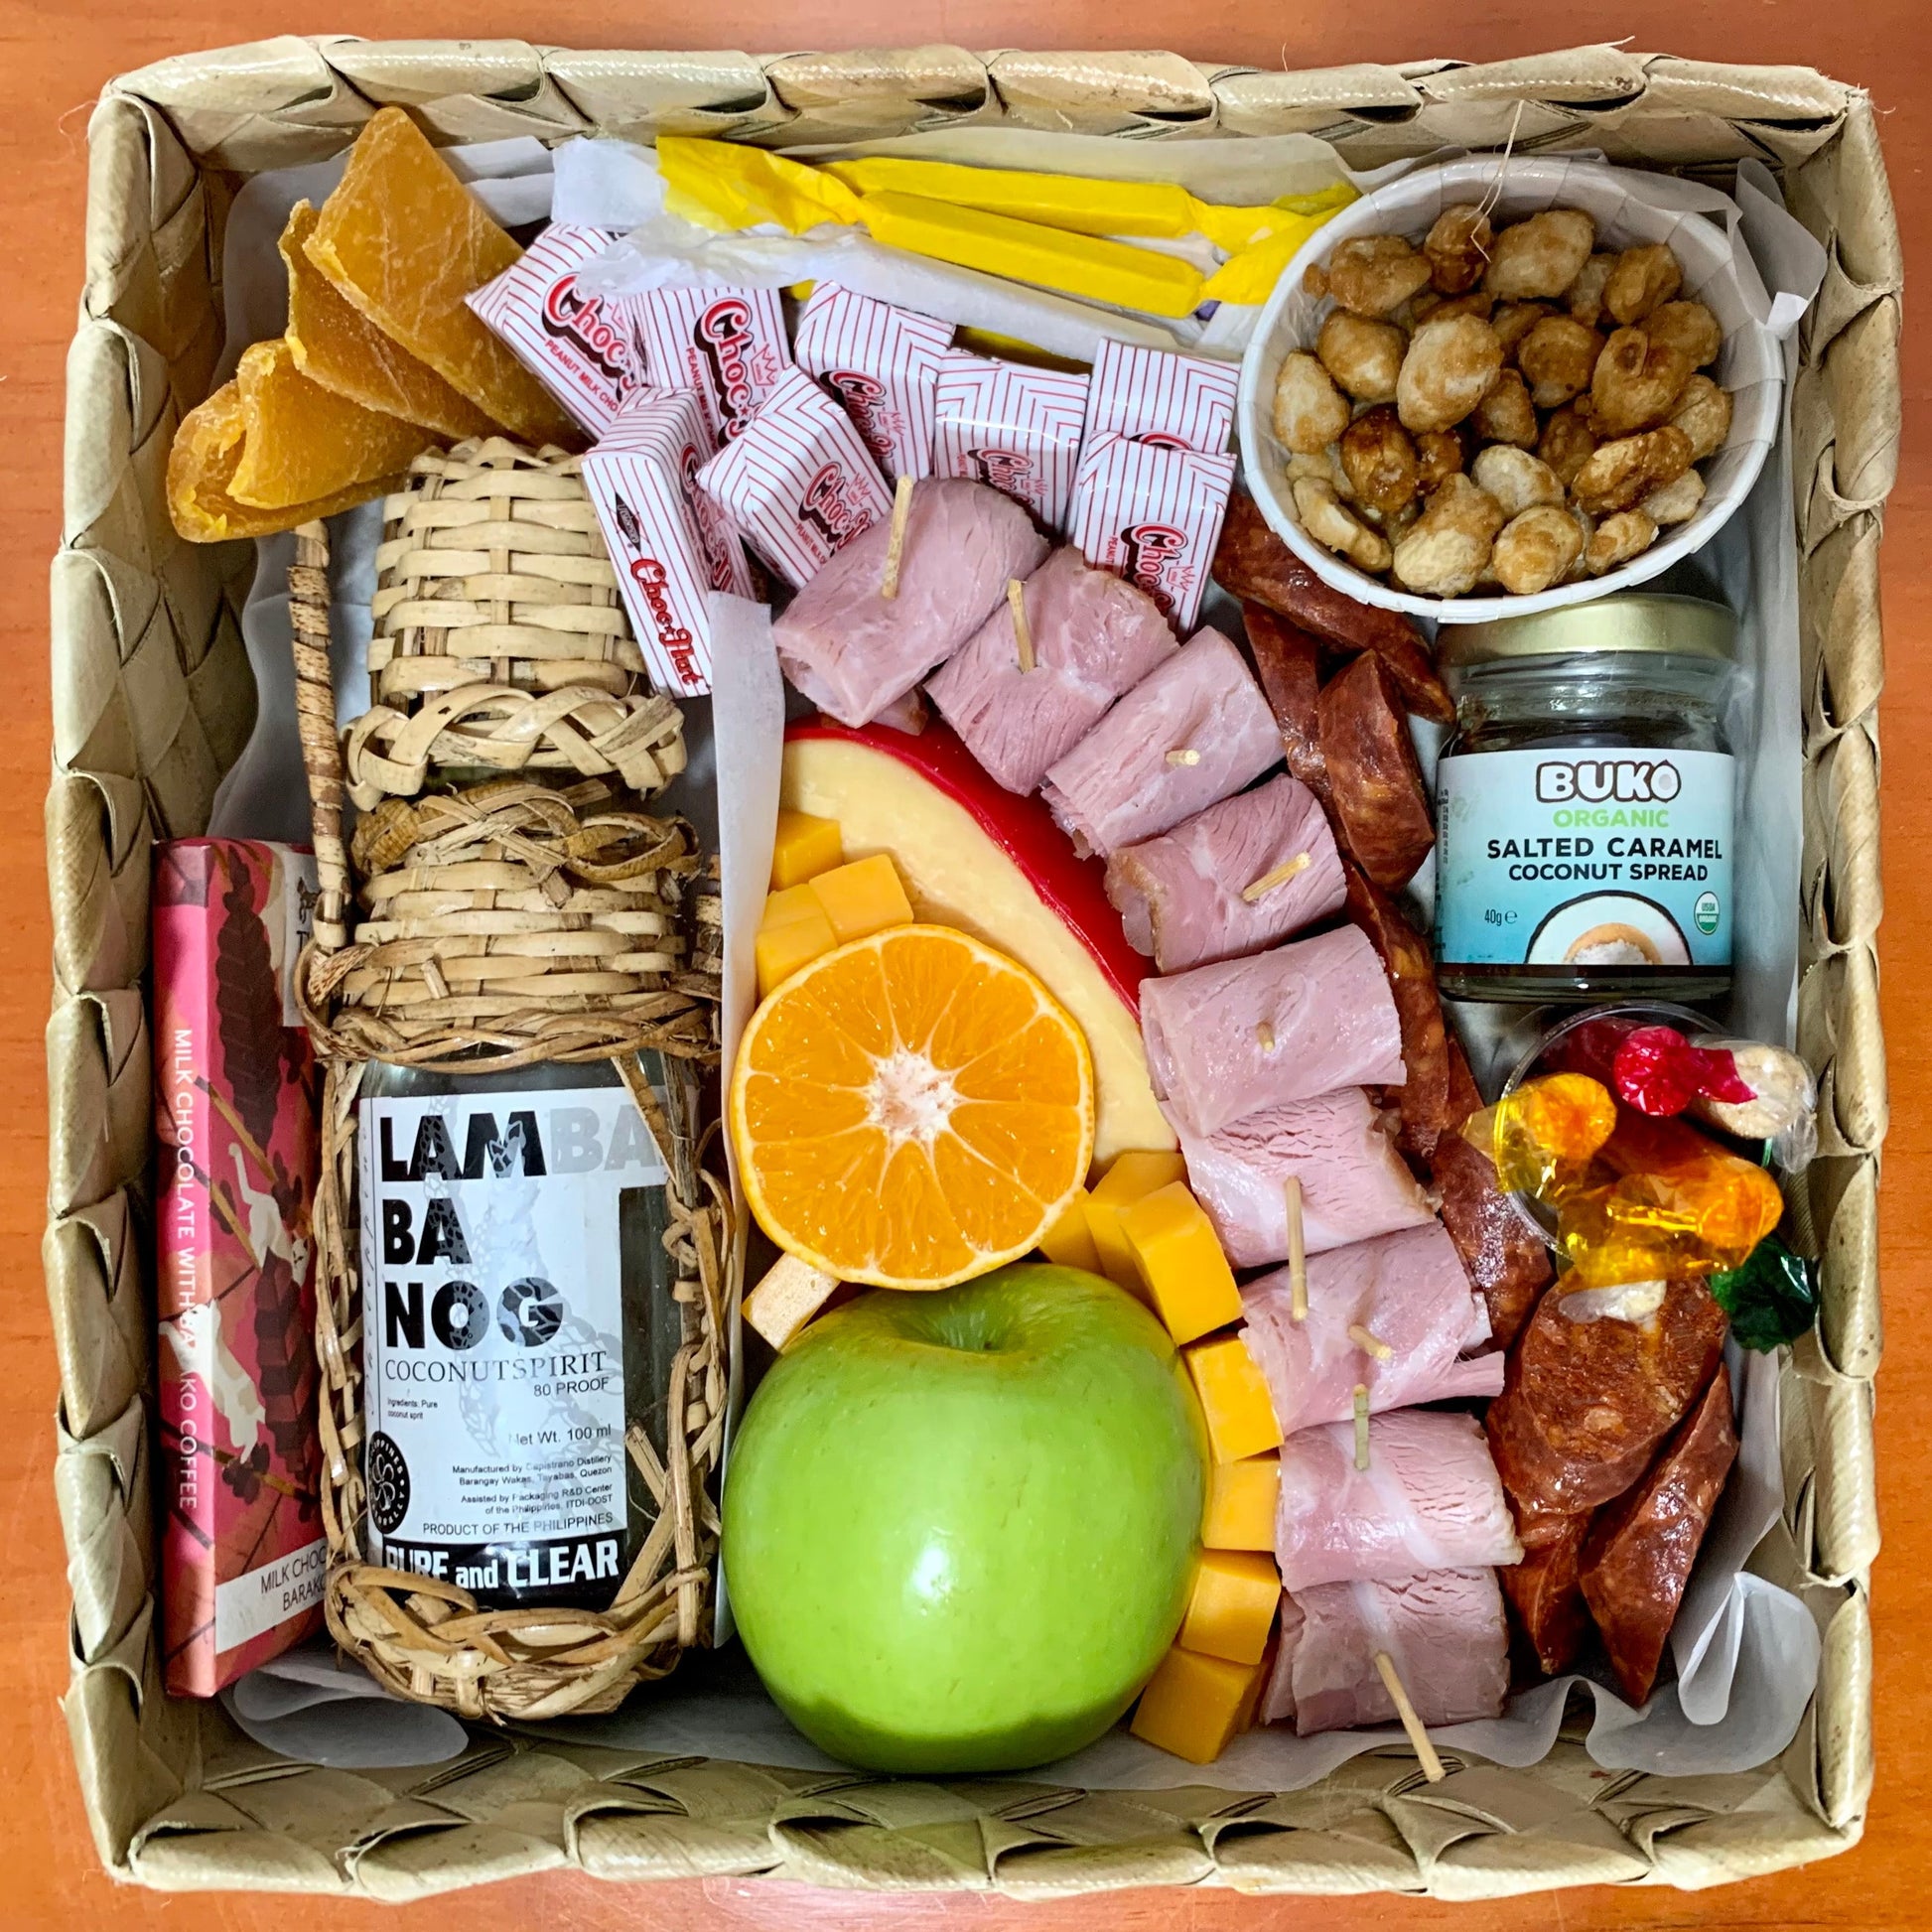 Grazing box with cheeses, cold cuts, fruits, nuts, and other treats